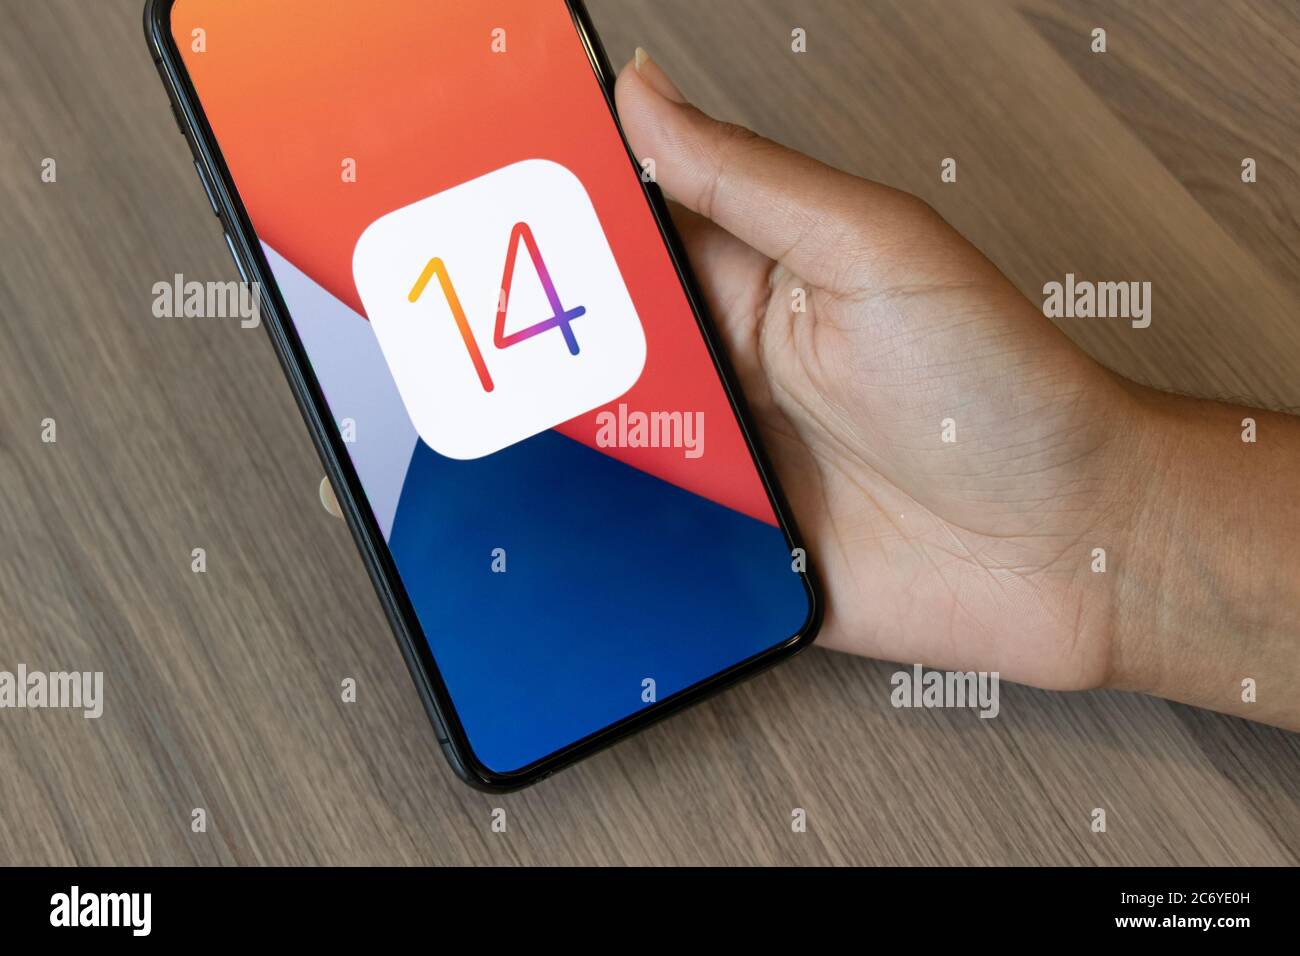 Person holding an iPhone with the iOS 14 logo on it, Apples newest operating software. Stock Photo